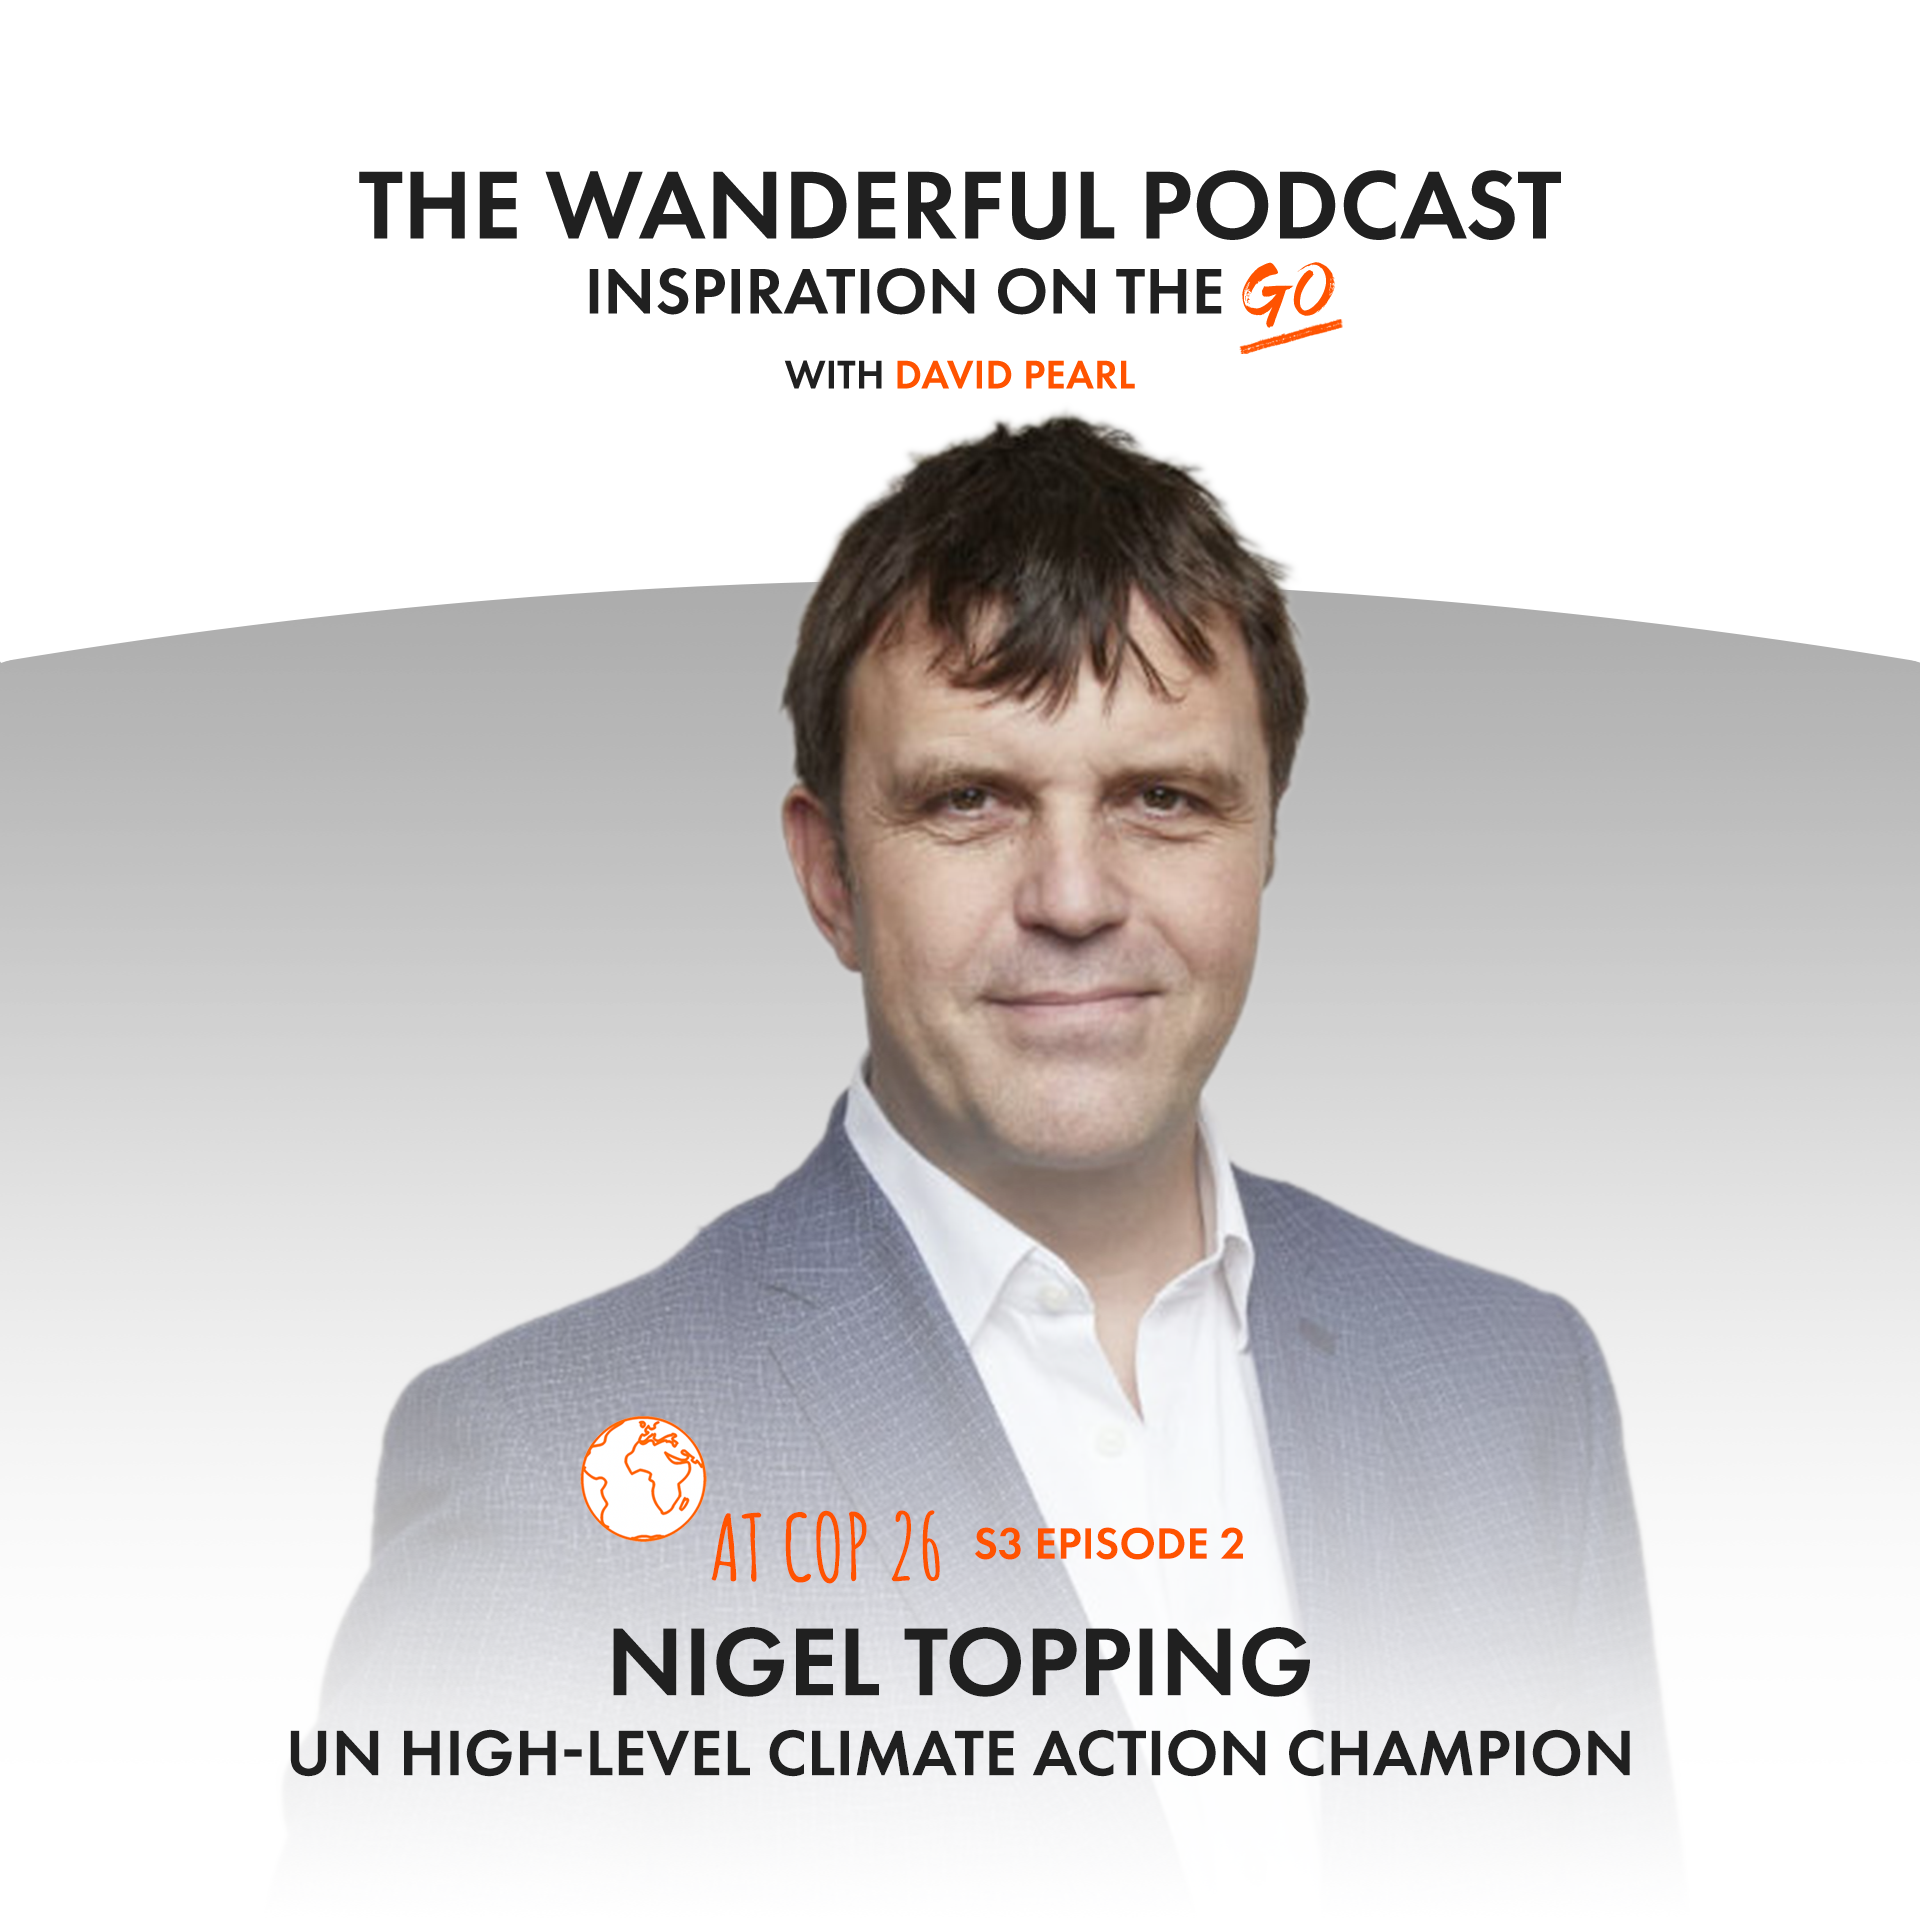 Nigel Topping: The Wanderful Podcast with David Pearl